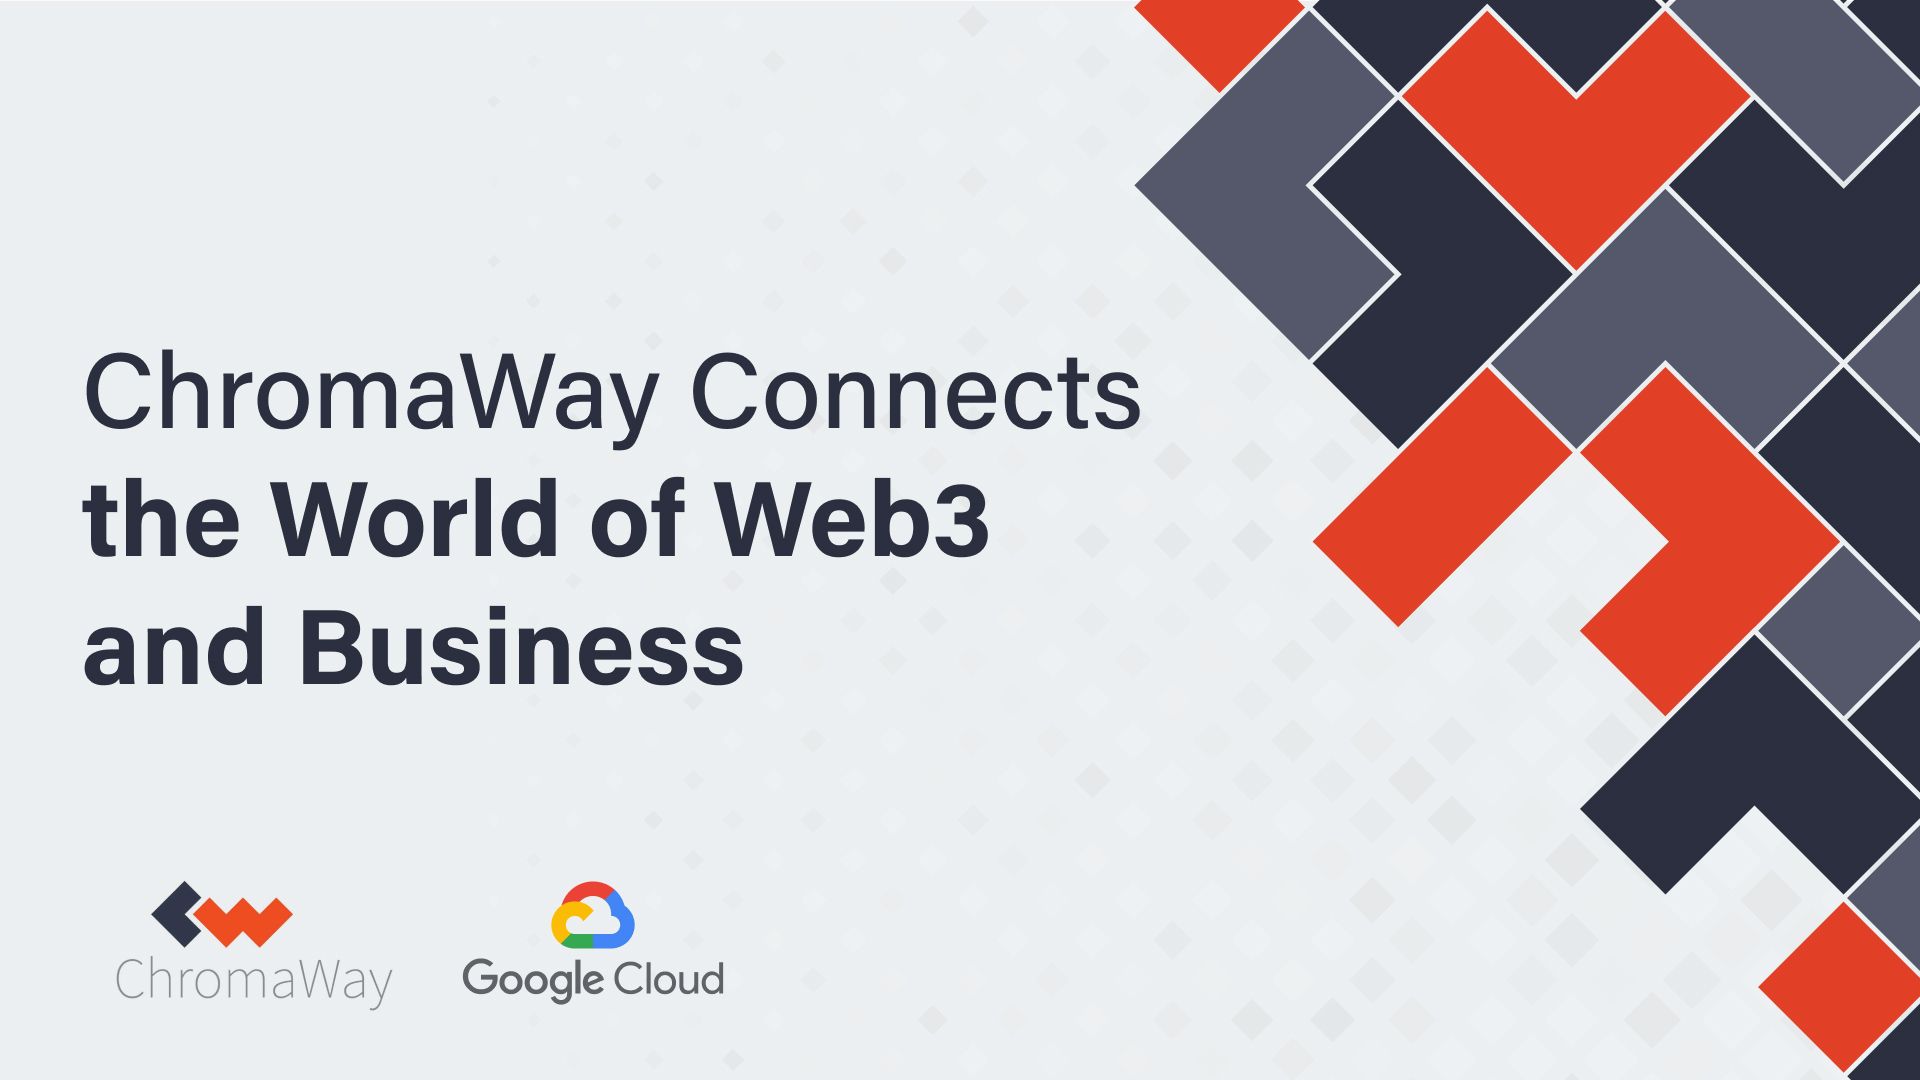 ChromaWay Connects the World of Web3 and Business at Google Sweden